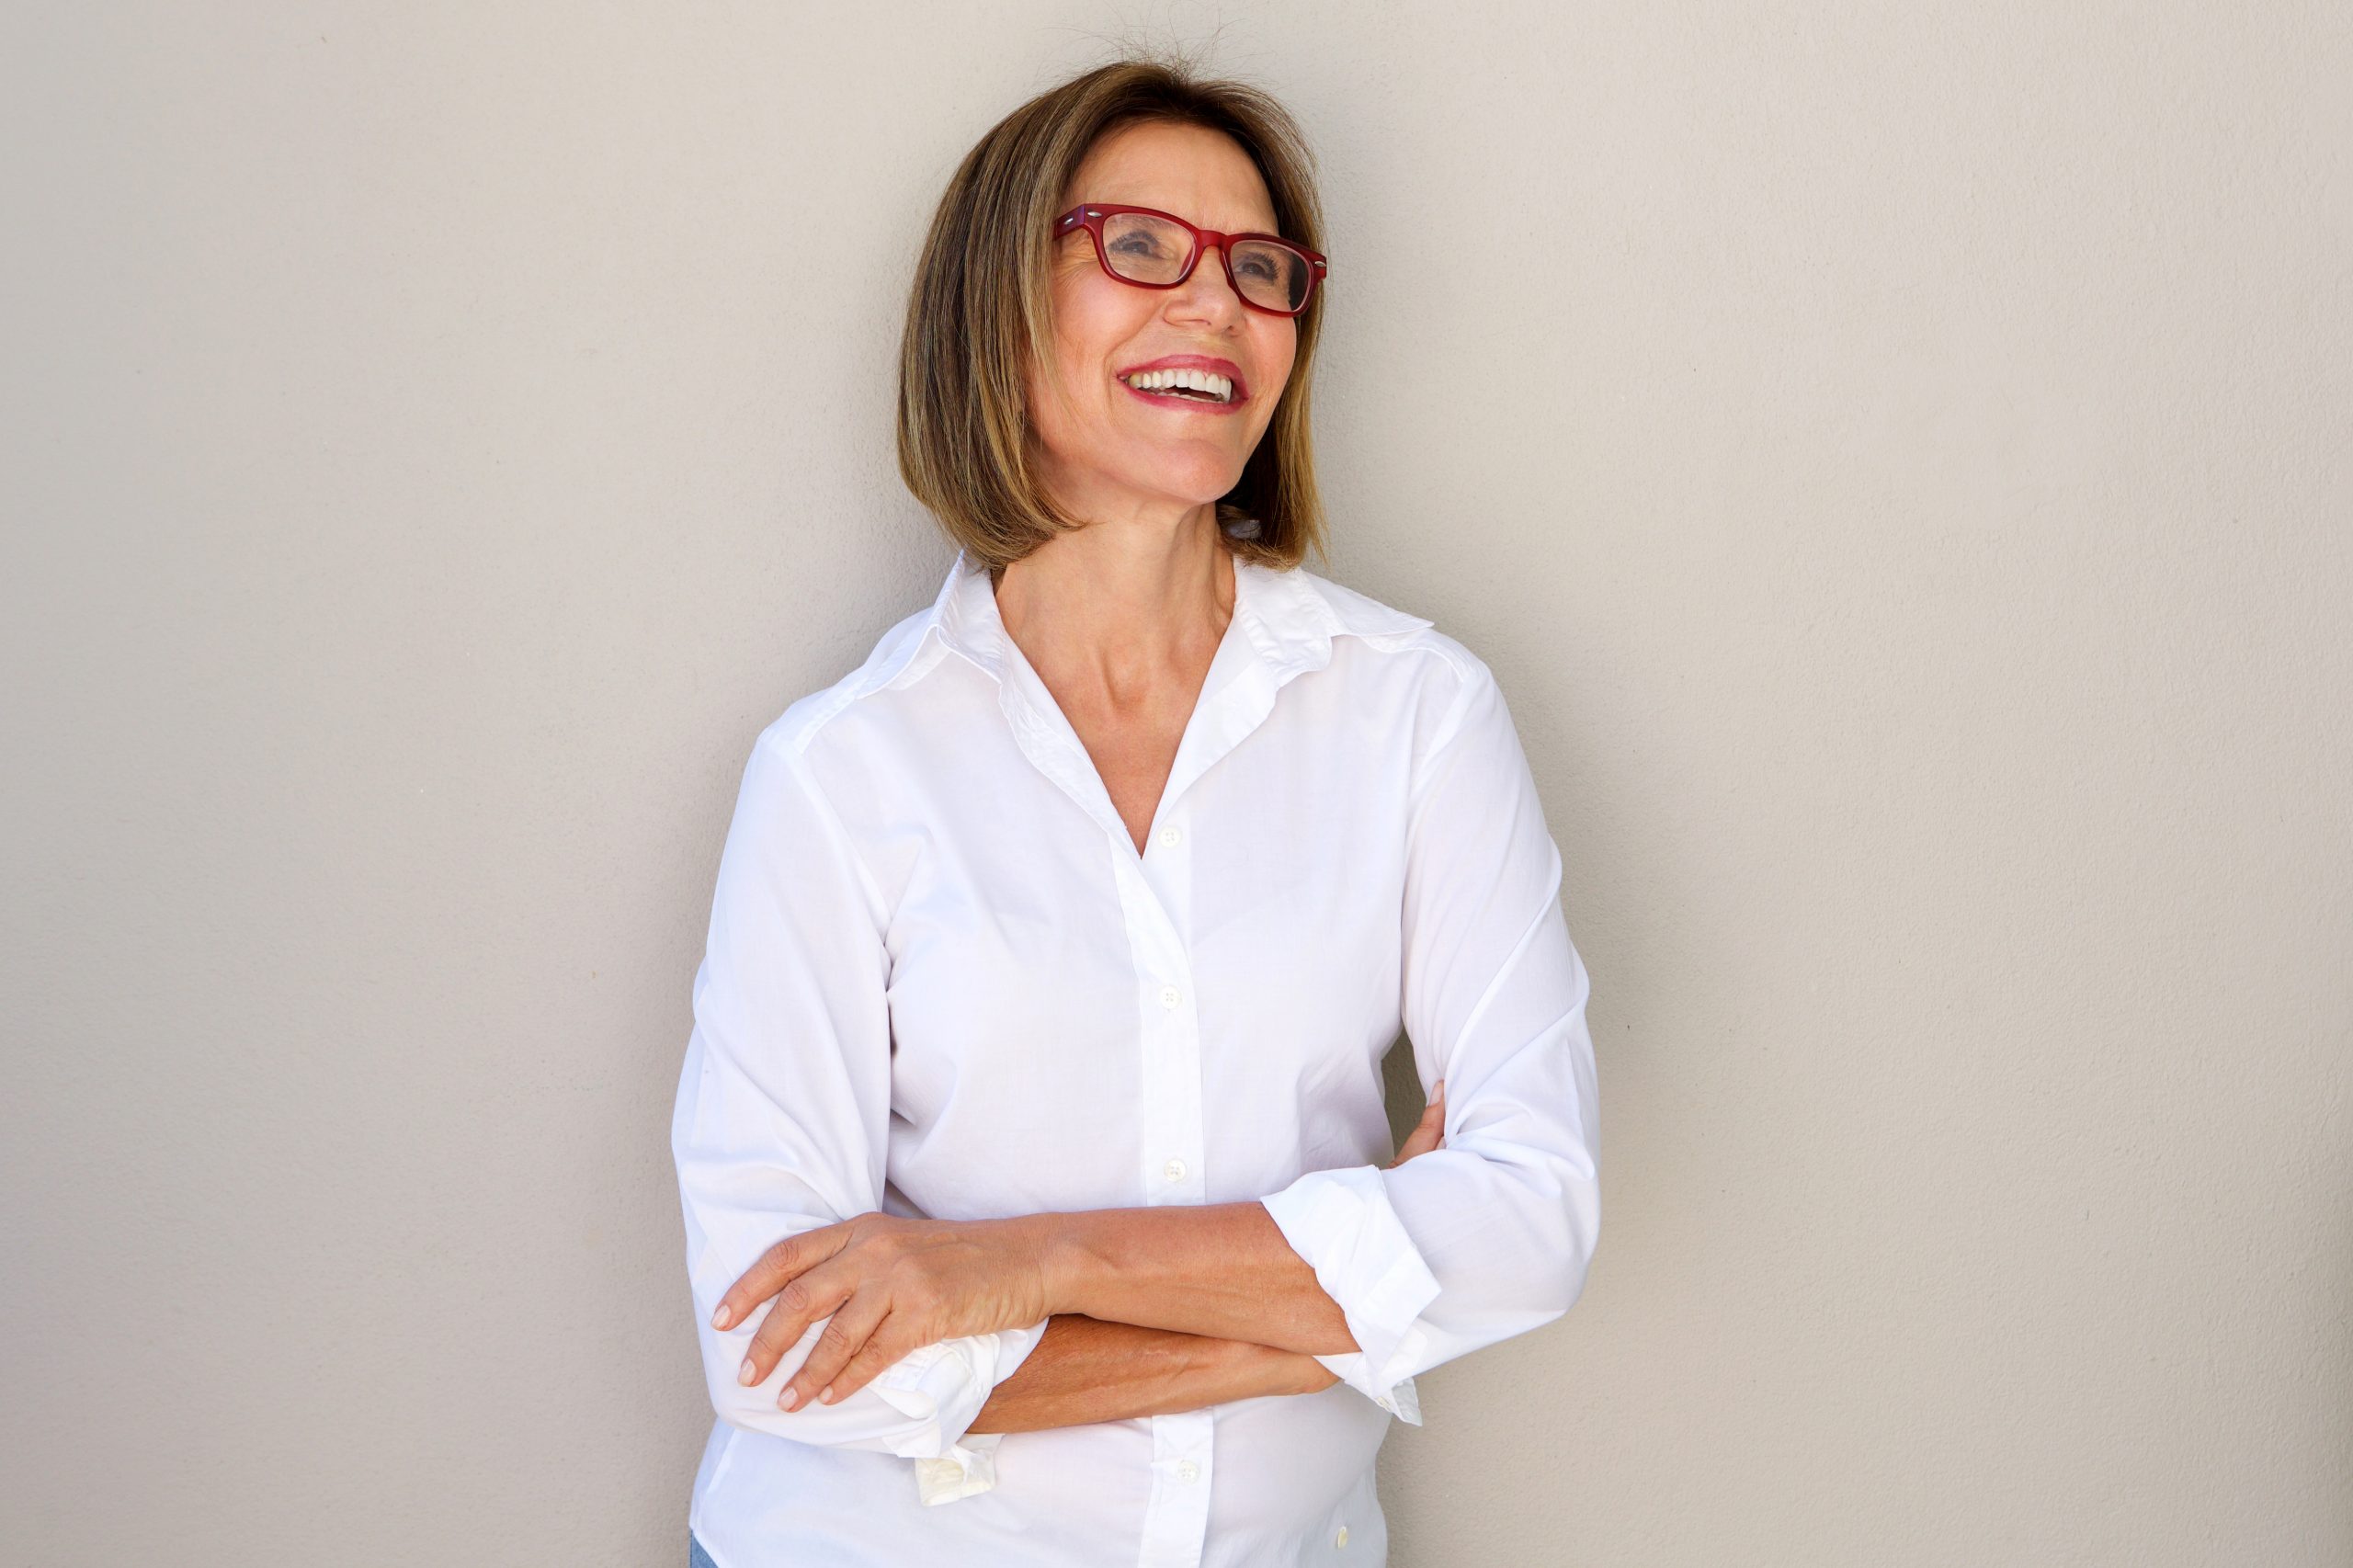 Portrait Of Business Woman With Glasses Smiling